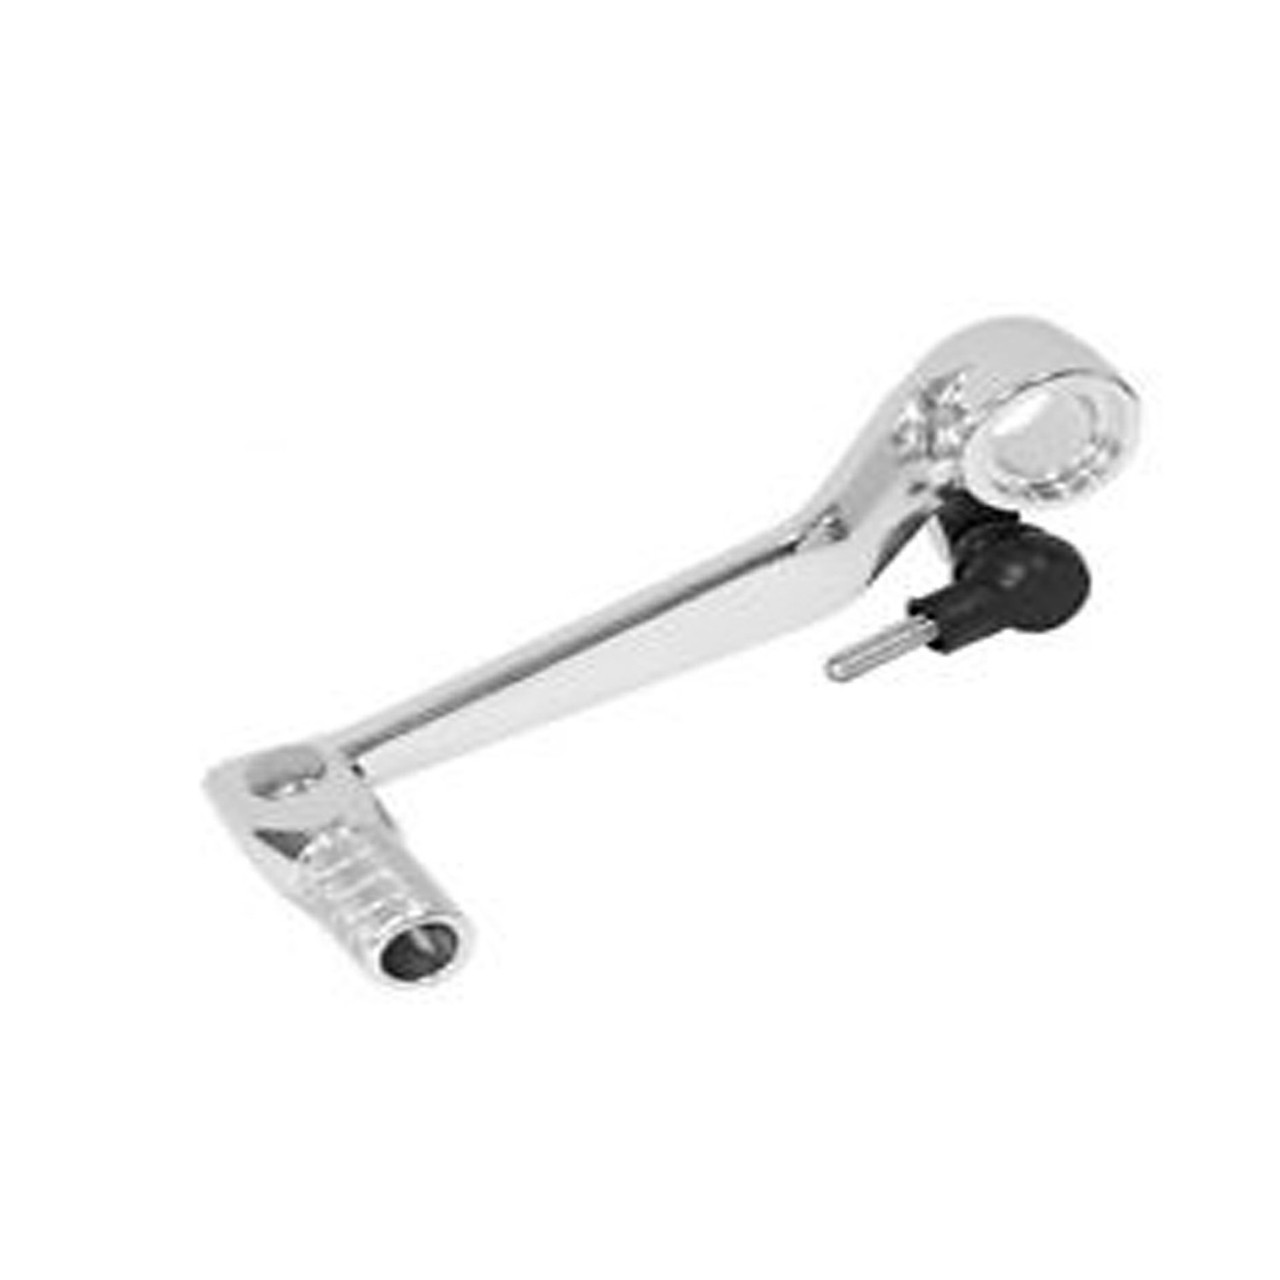 New Kawasaki Motorcycle Replacement Aluminum Shift Lever, ZX-12R, 13242-1363